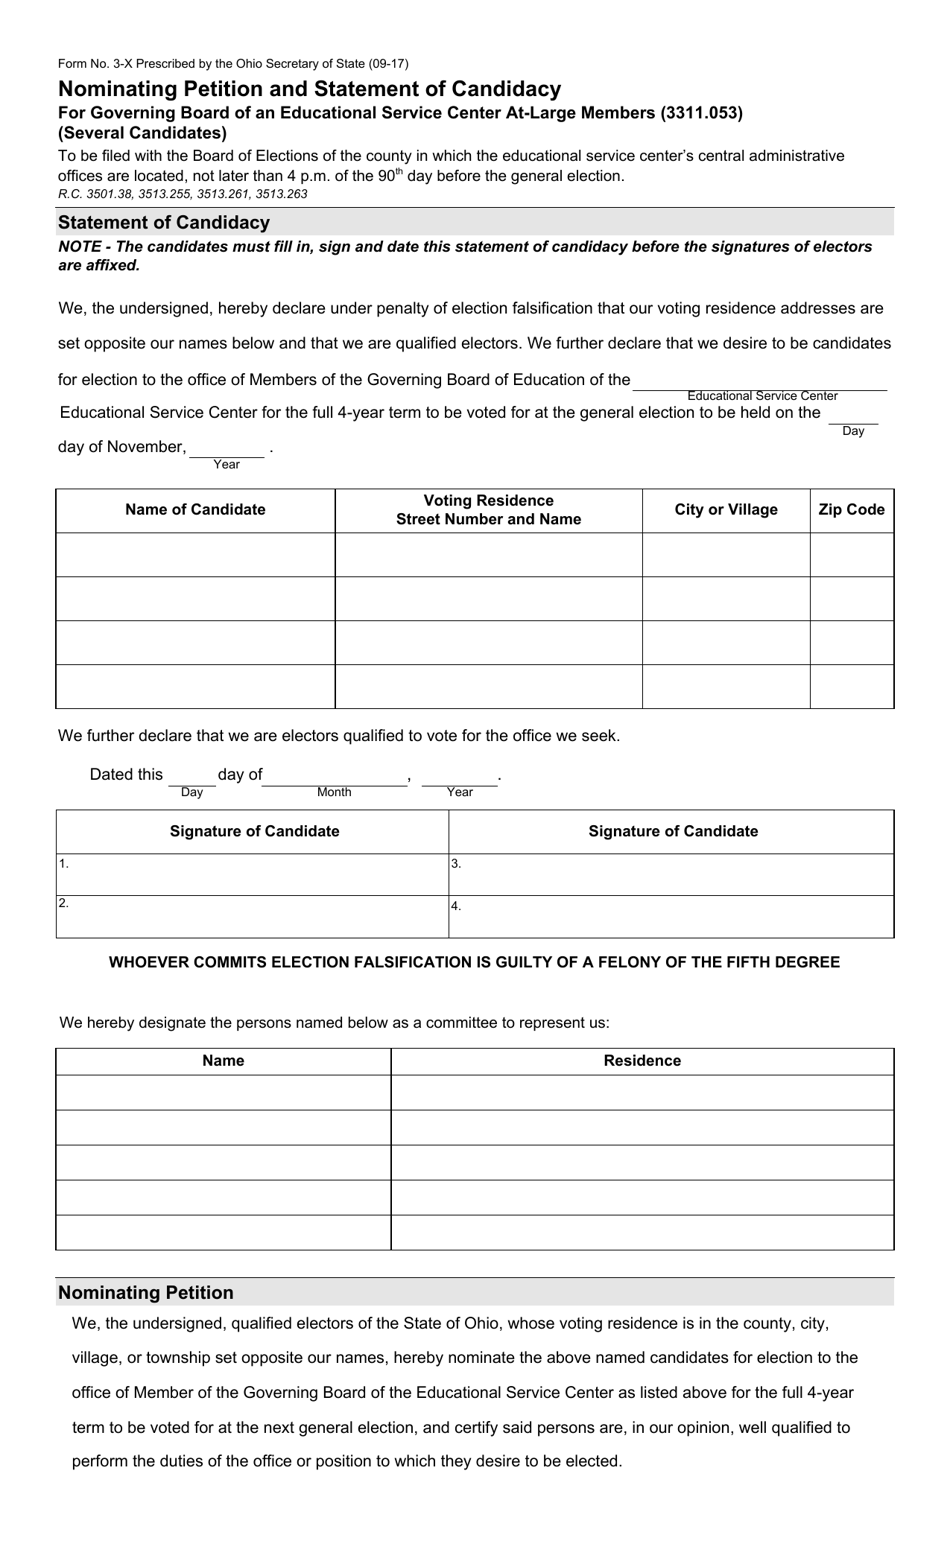 Form 3-X Nominating Petition and Statement of Candidacy for Governing Board of an Educational Service Center at-Large Members (3311.053) (Several Candidates) - Ohio, Page 1